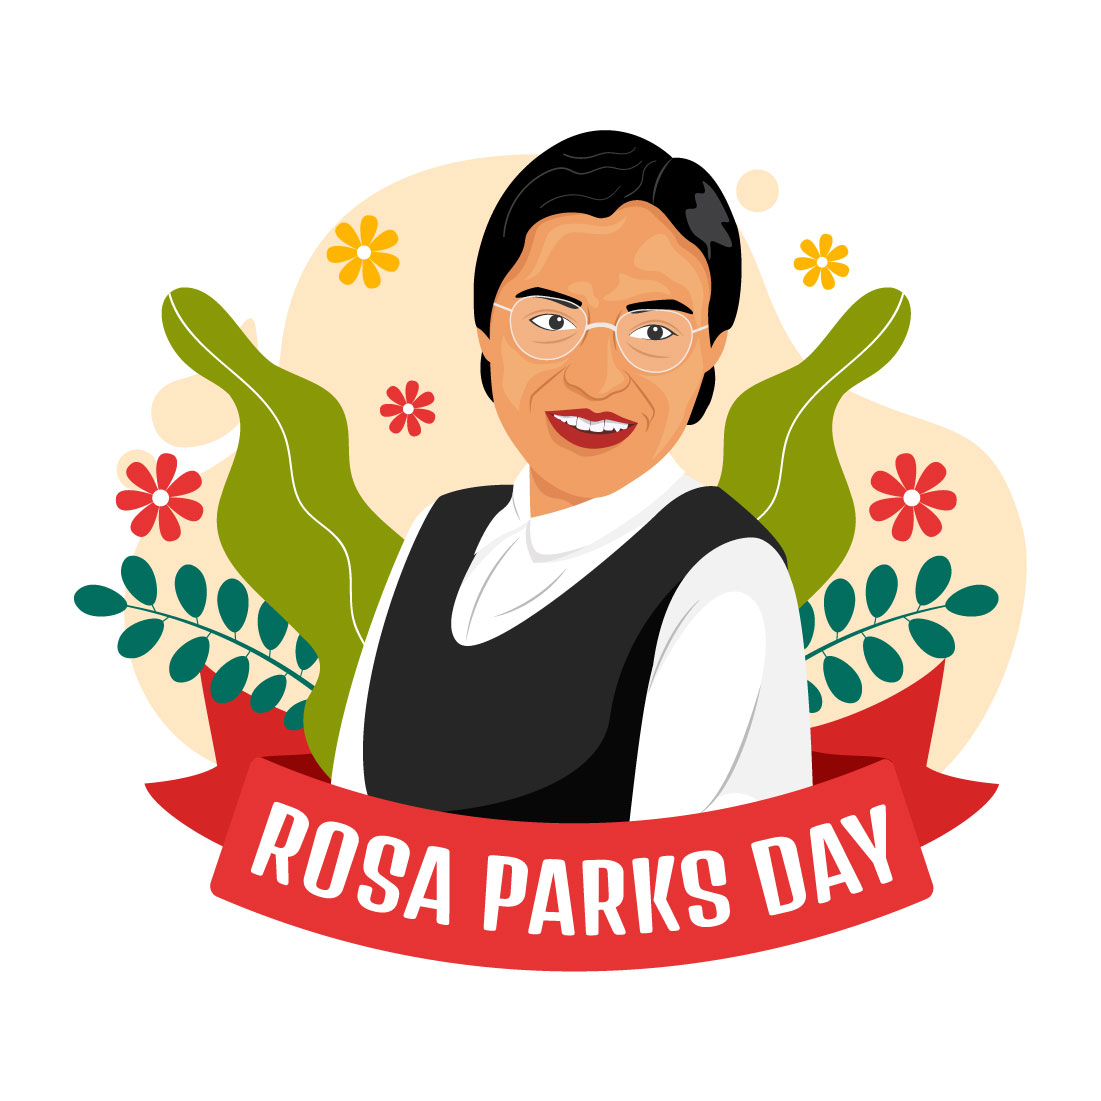 9 Rosa Parks Day Illustration preview image.